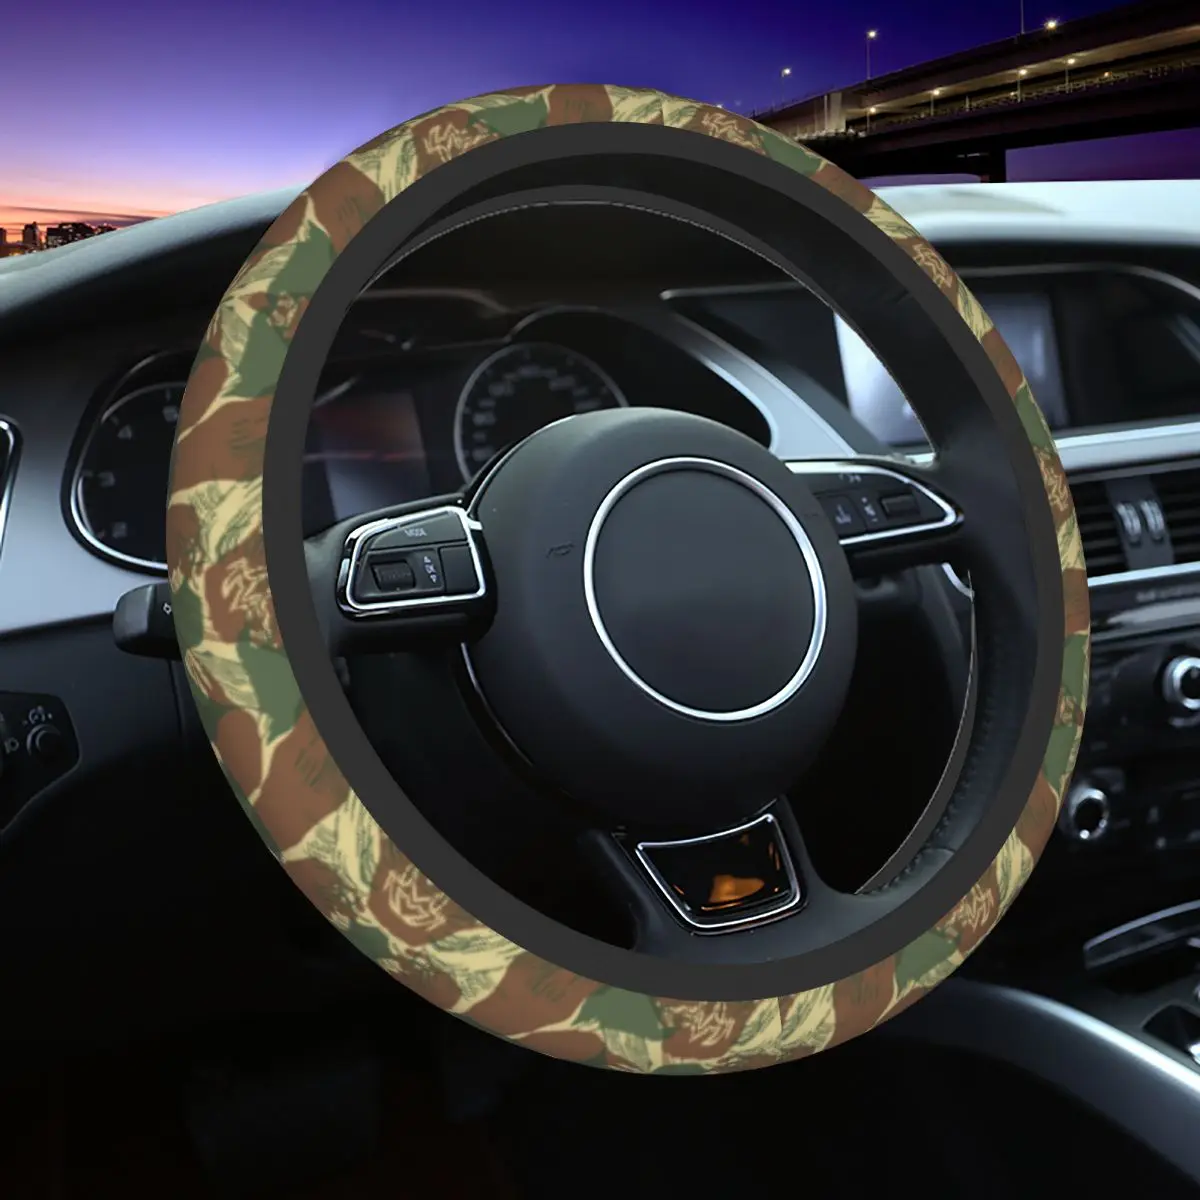 

37-38 Steering Wheel Covers Rhodesian Brush Stroke Camouflage Soft Military Armed Braid On The Steering Wheel Cover Accessories